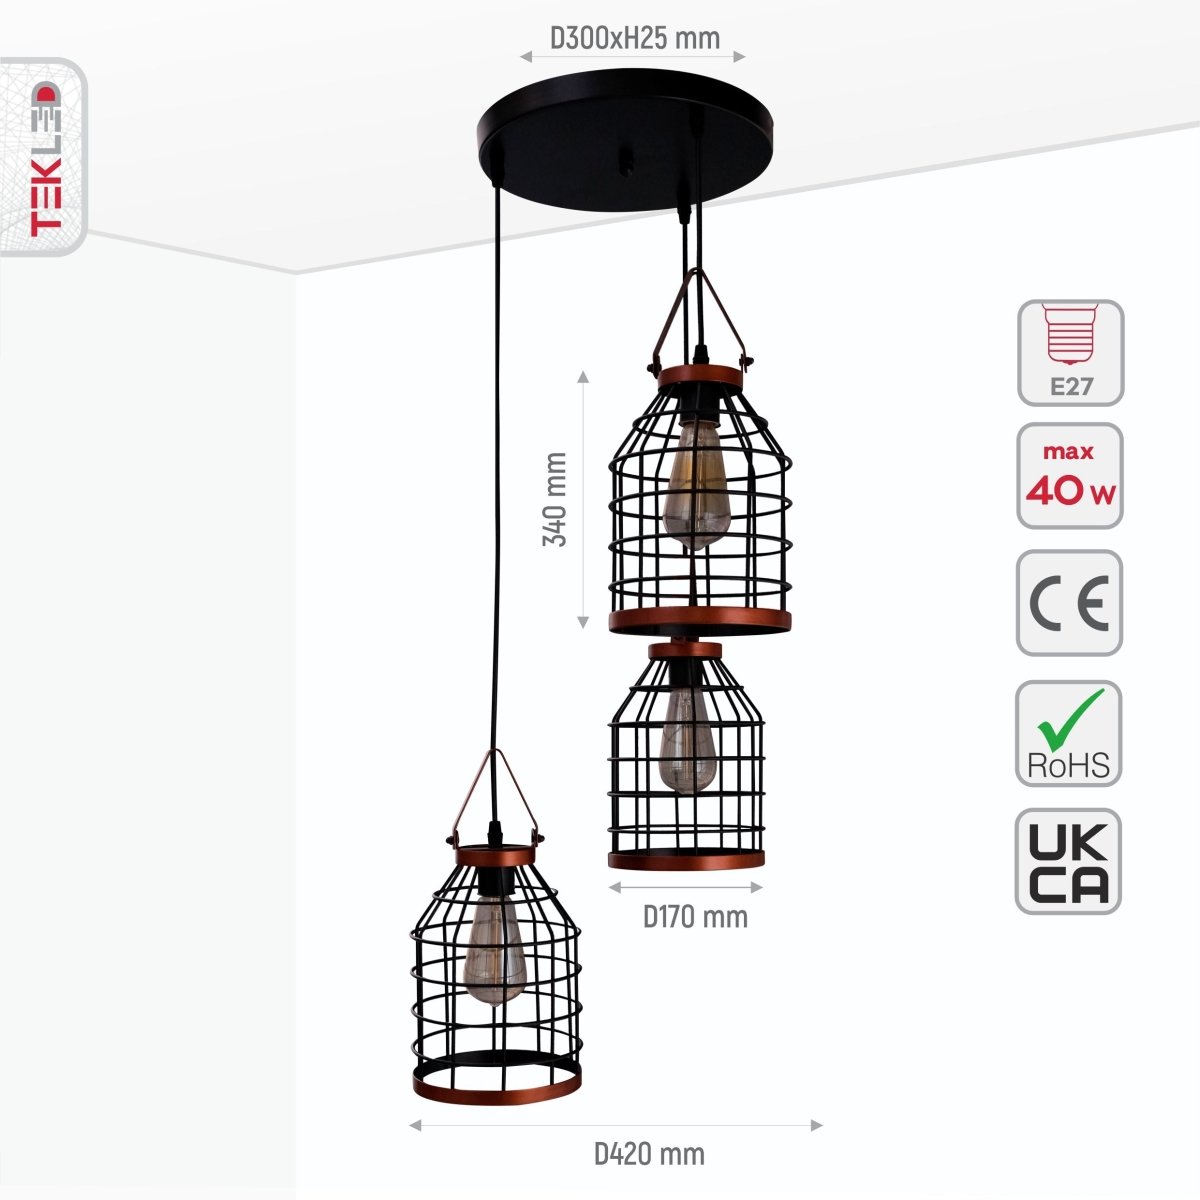 Size and specs of Black Cage Metal Pendant Light with 3xE27 Fitting | TEKLED 156-19516